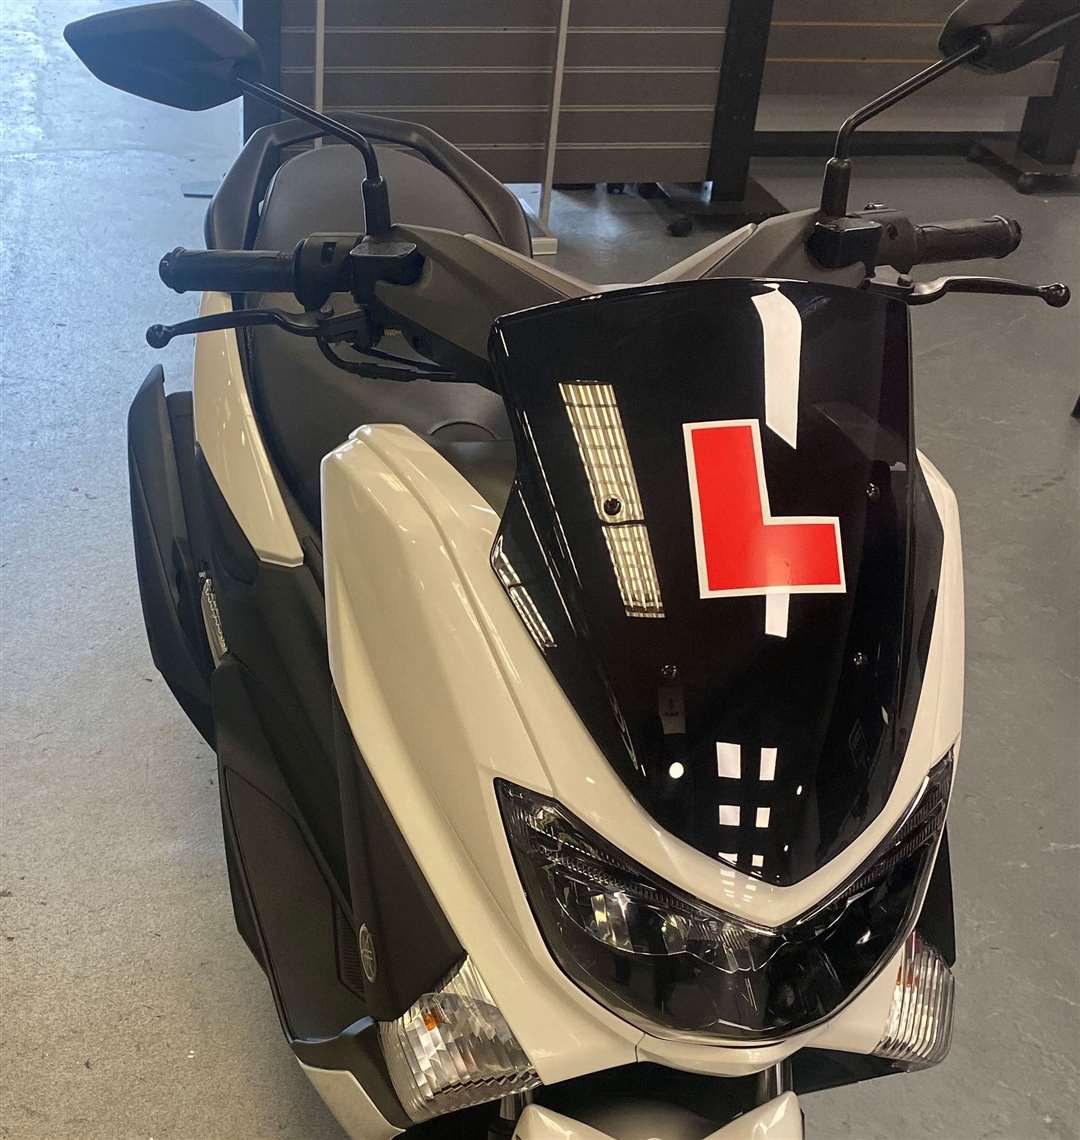 Police are looking for this moped allegedly stolen in Maidstone